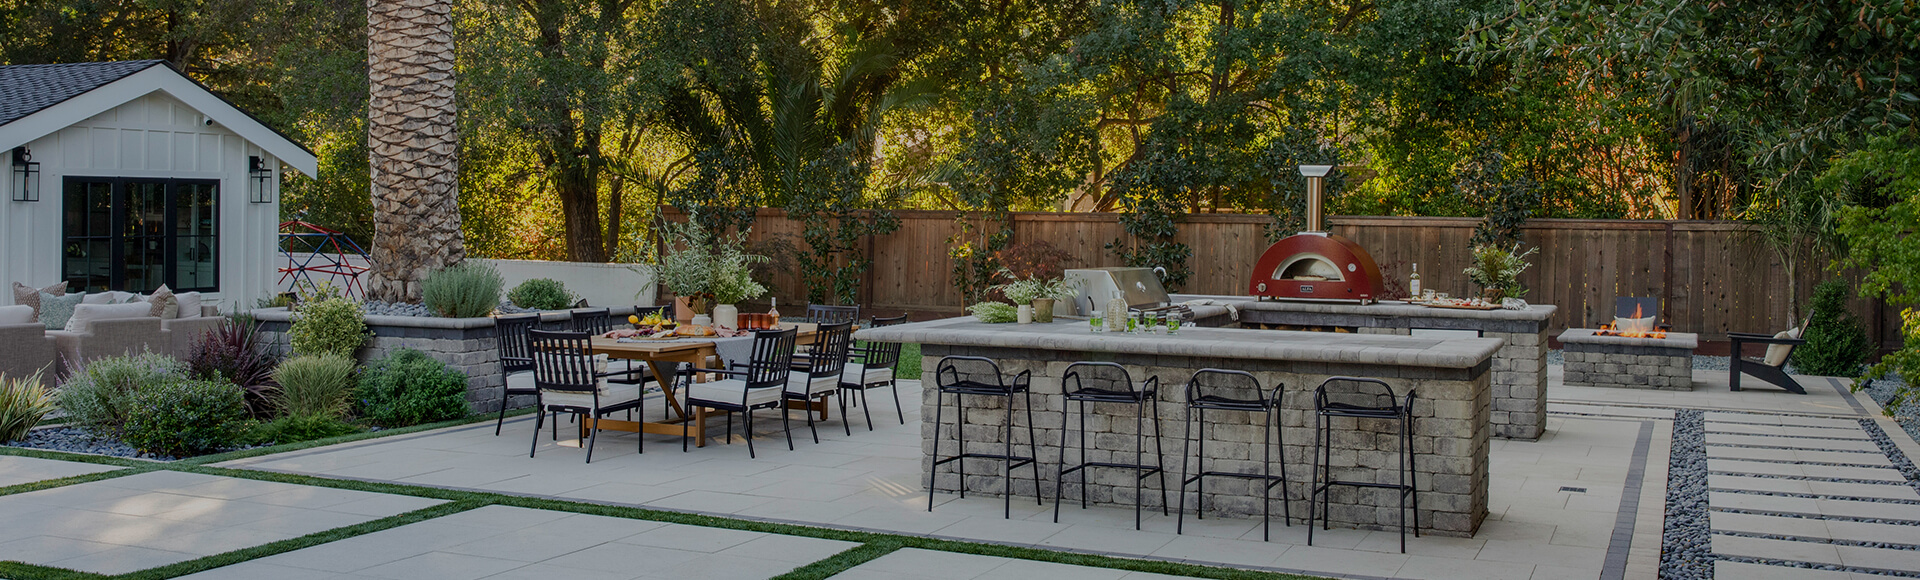 Backyard with pavers and outdoor kitchen